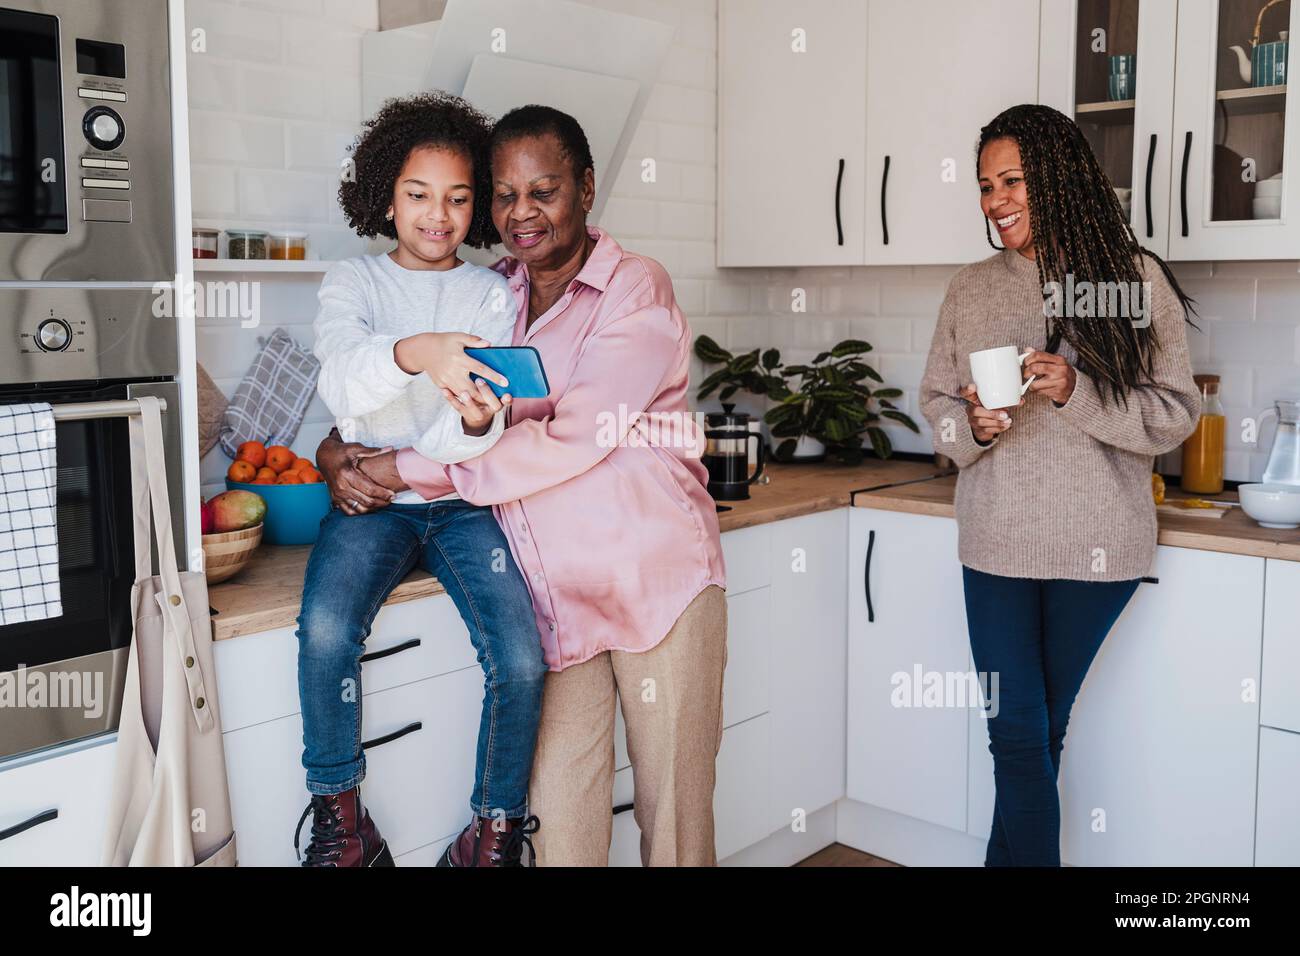 Family spending leisure time in kitchen at home Stock Photo